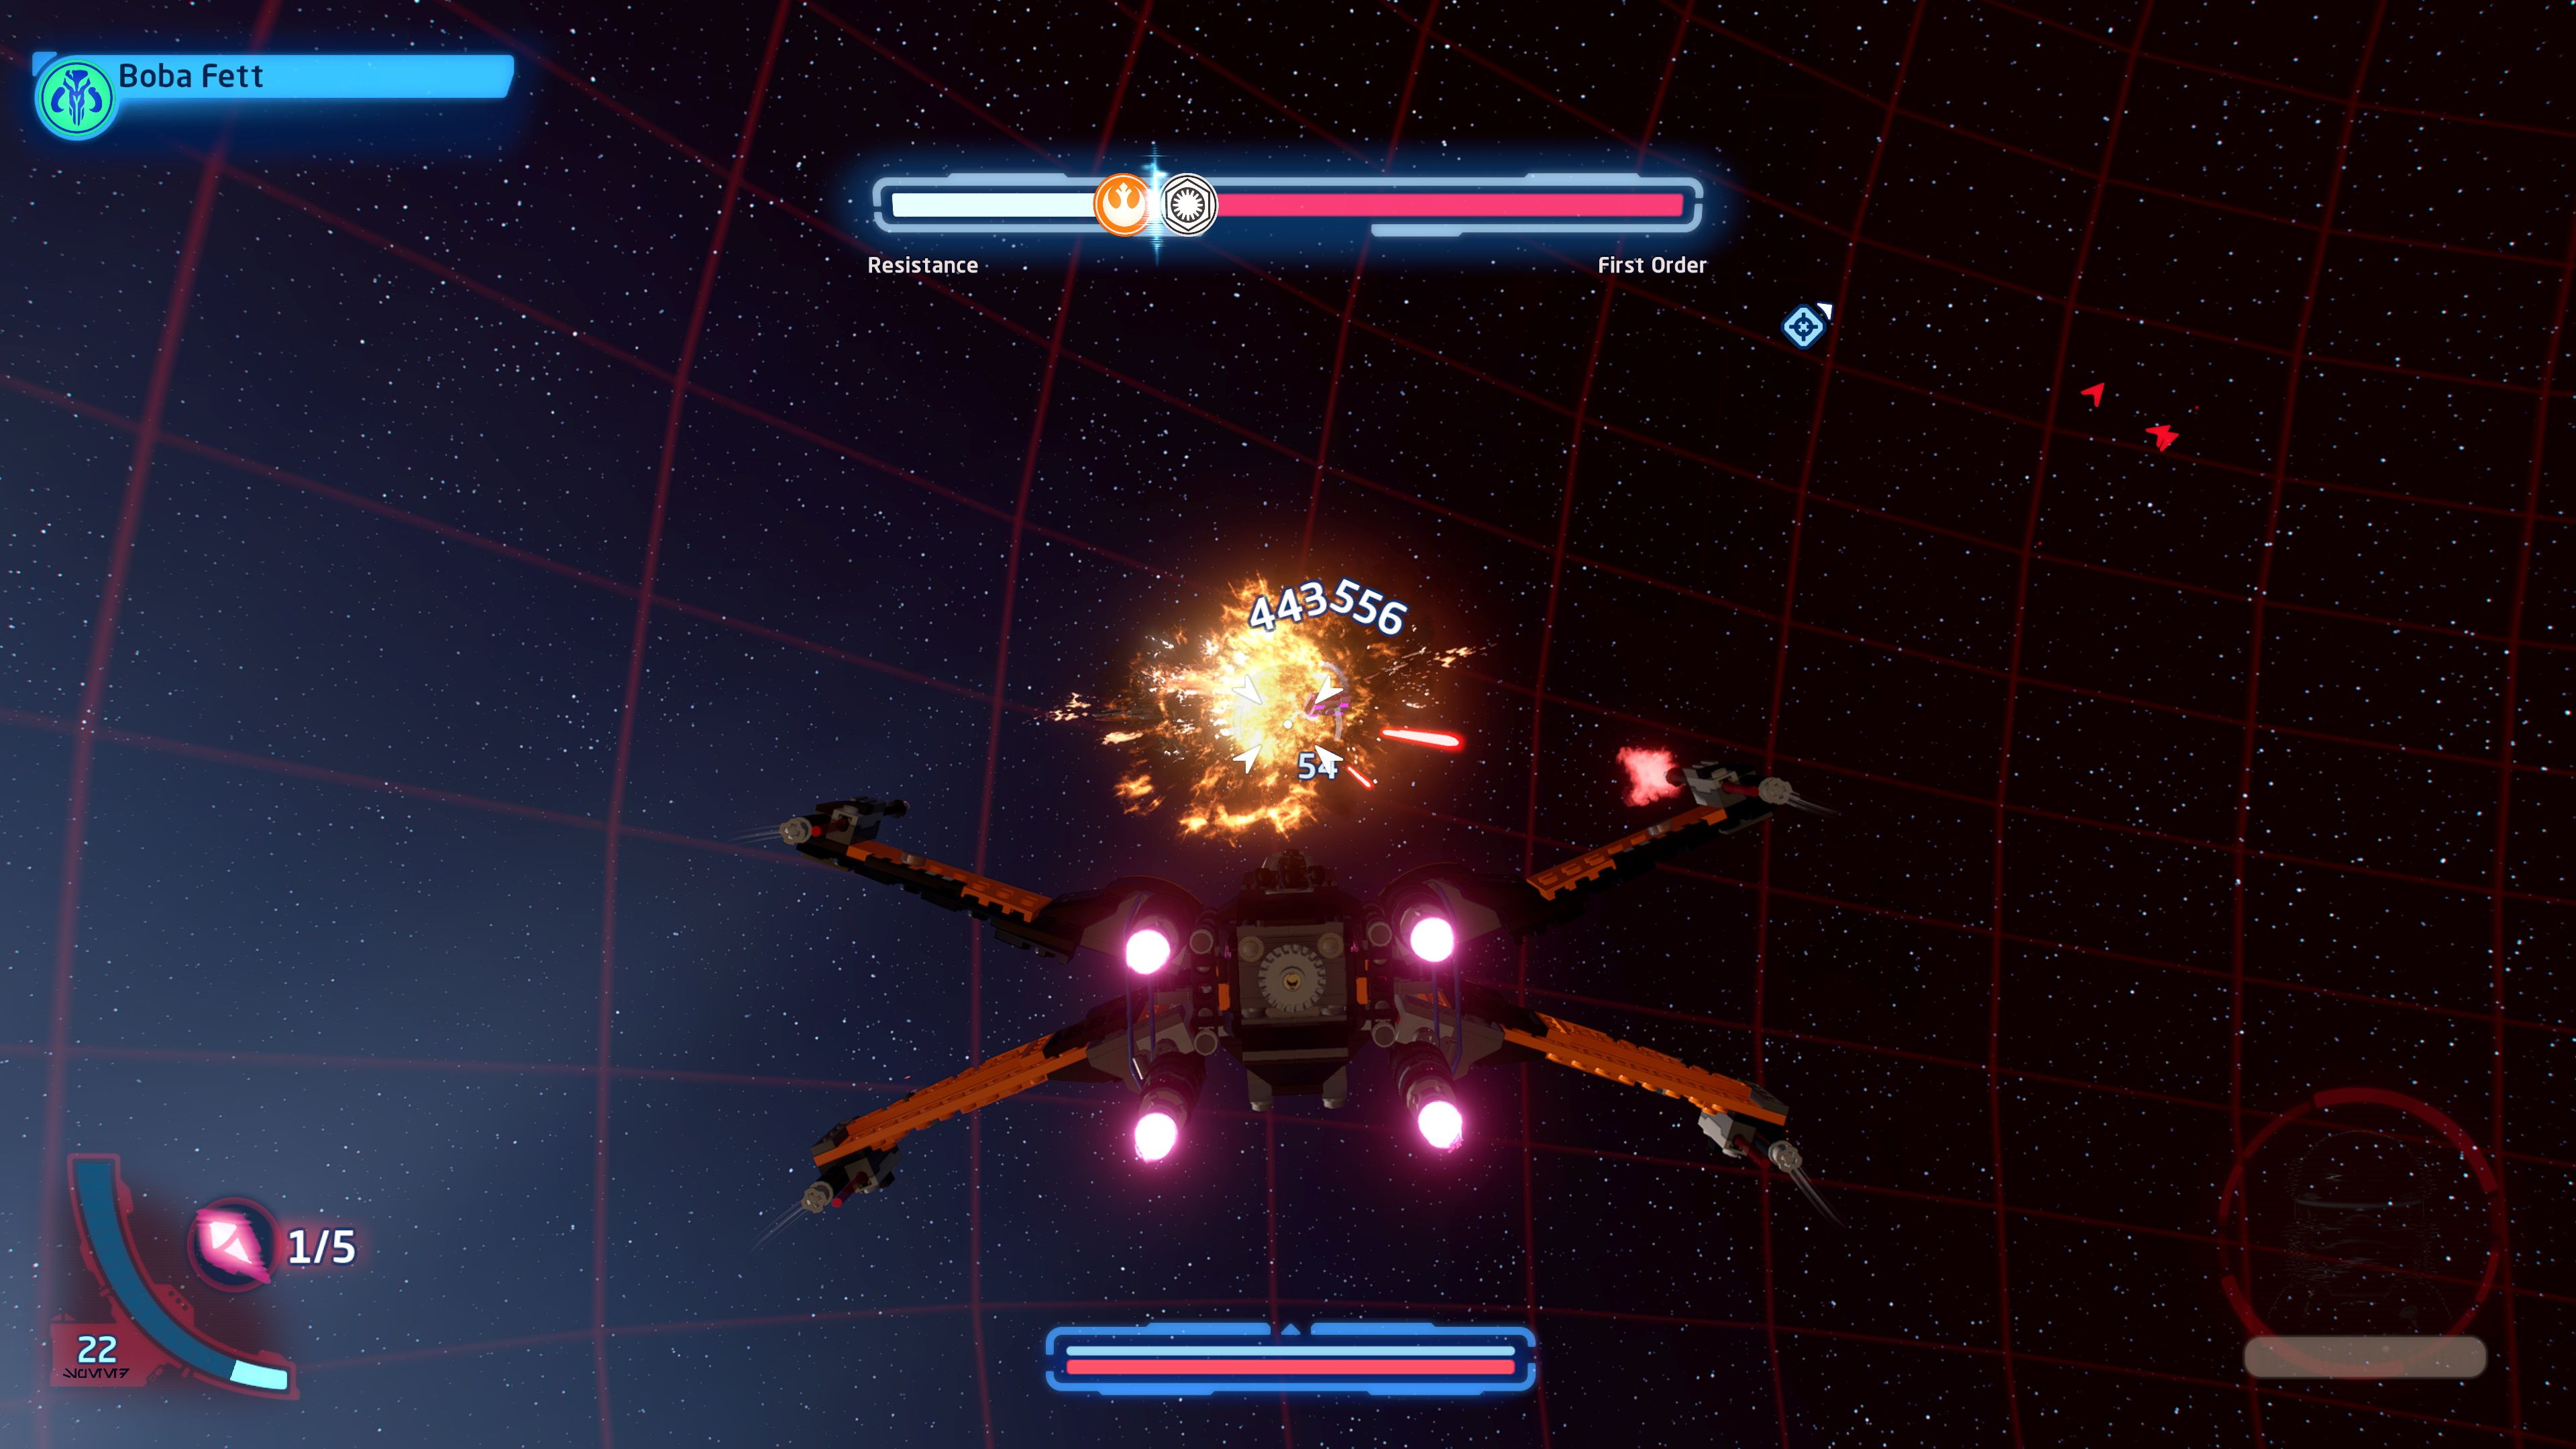 First Order Worst Order Side Mission (showing a space battle)